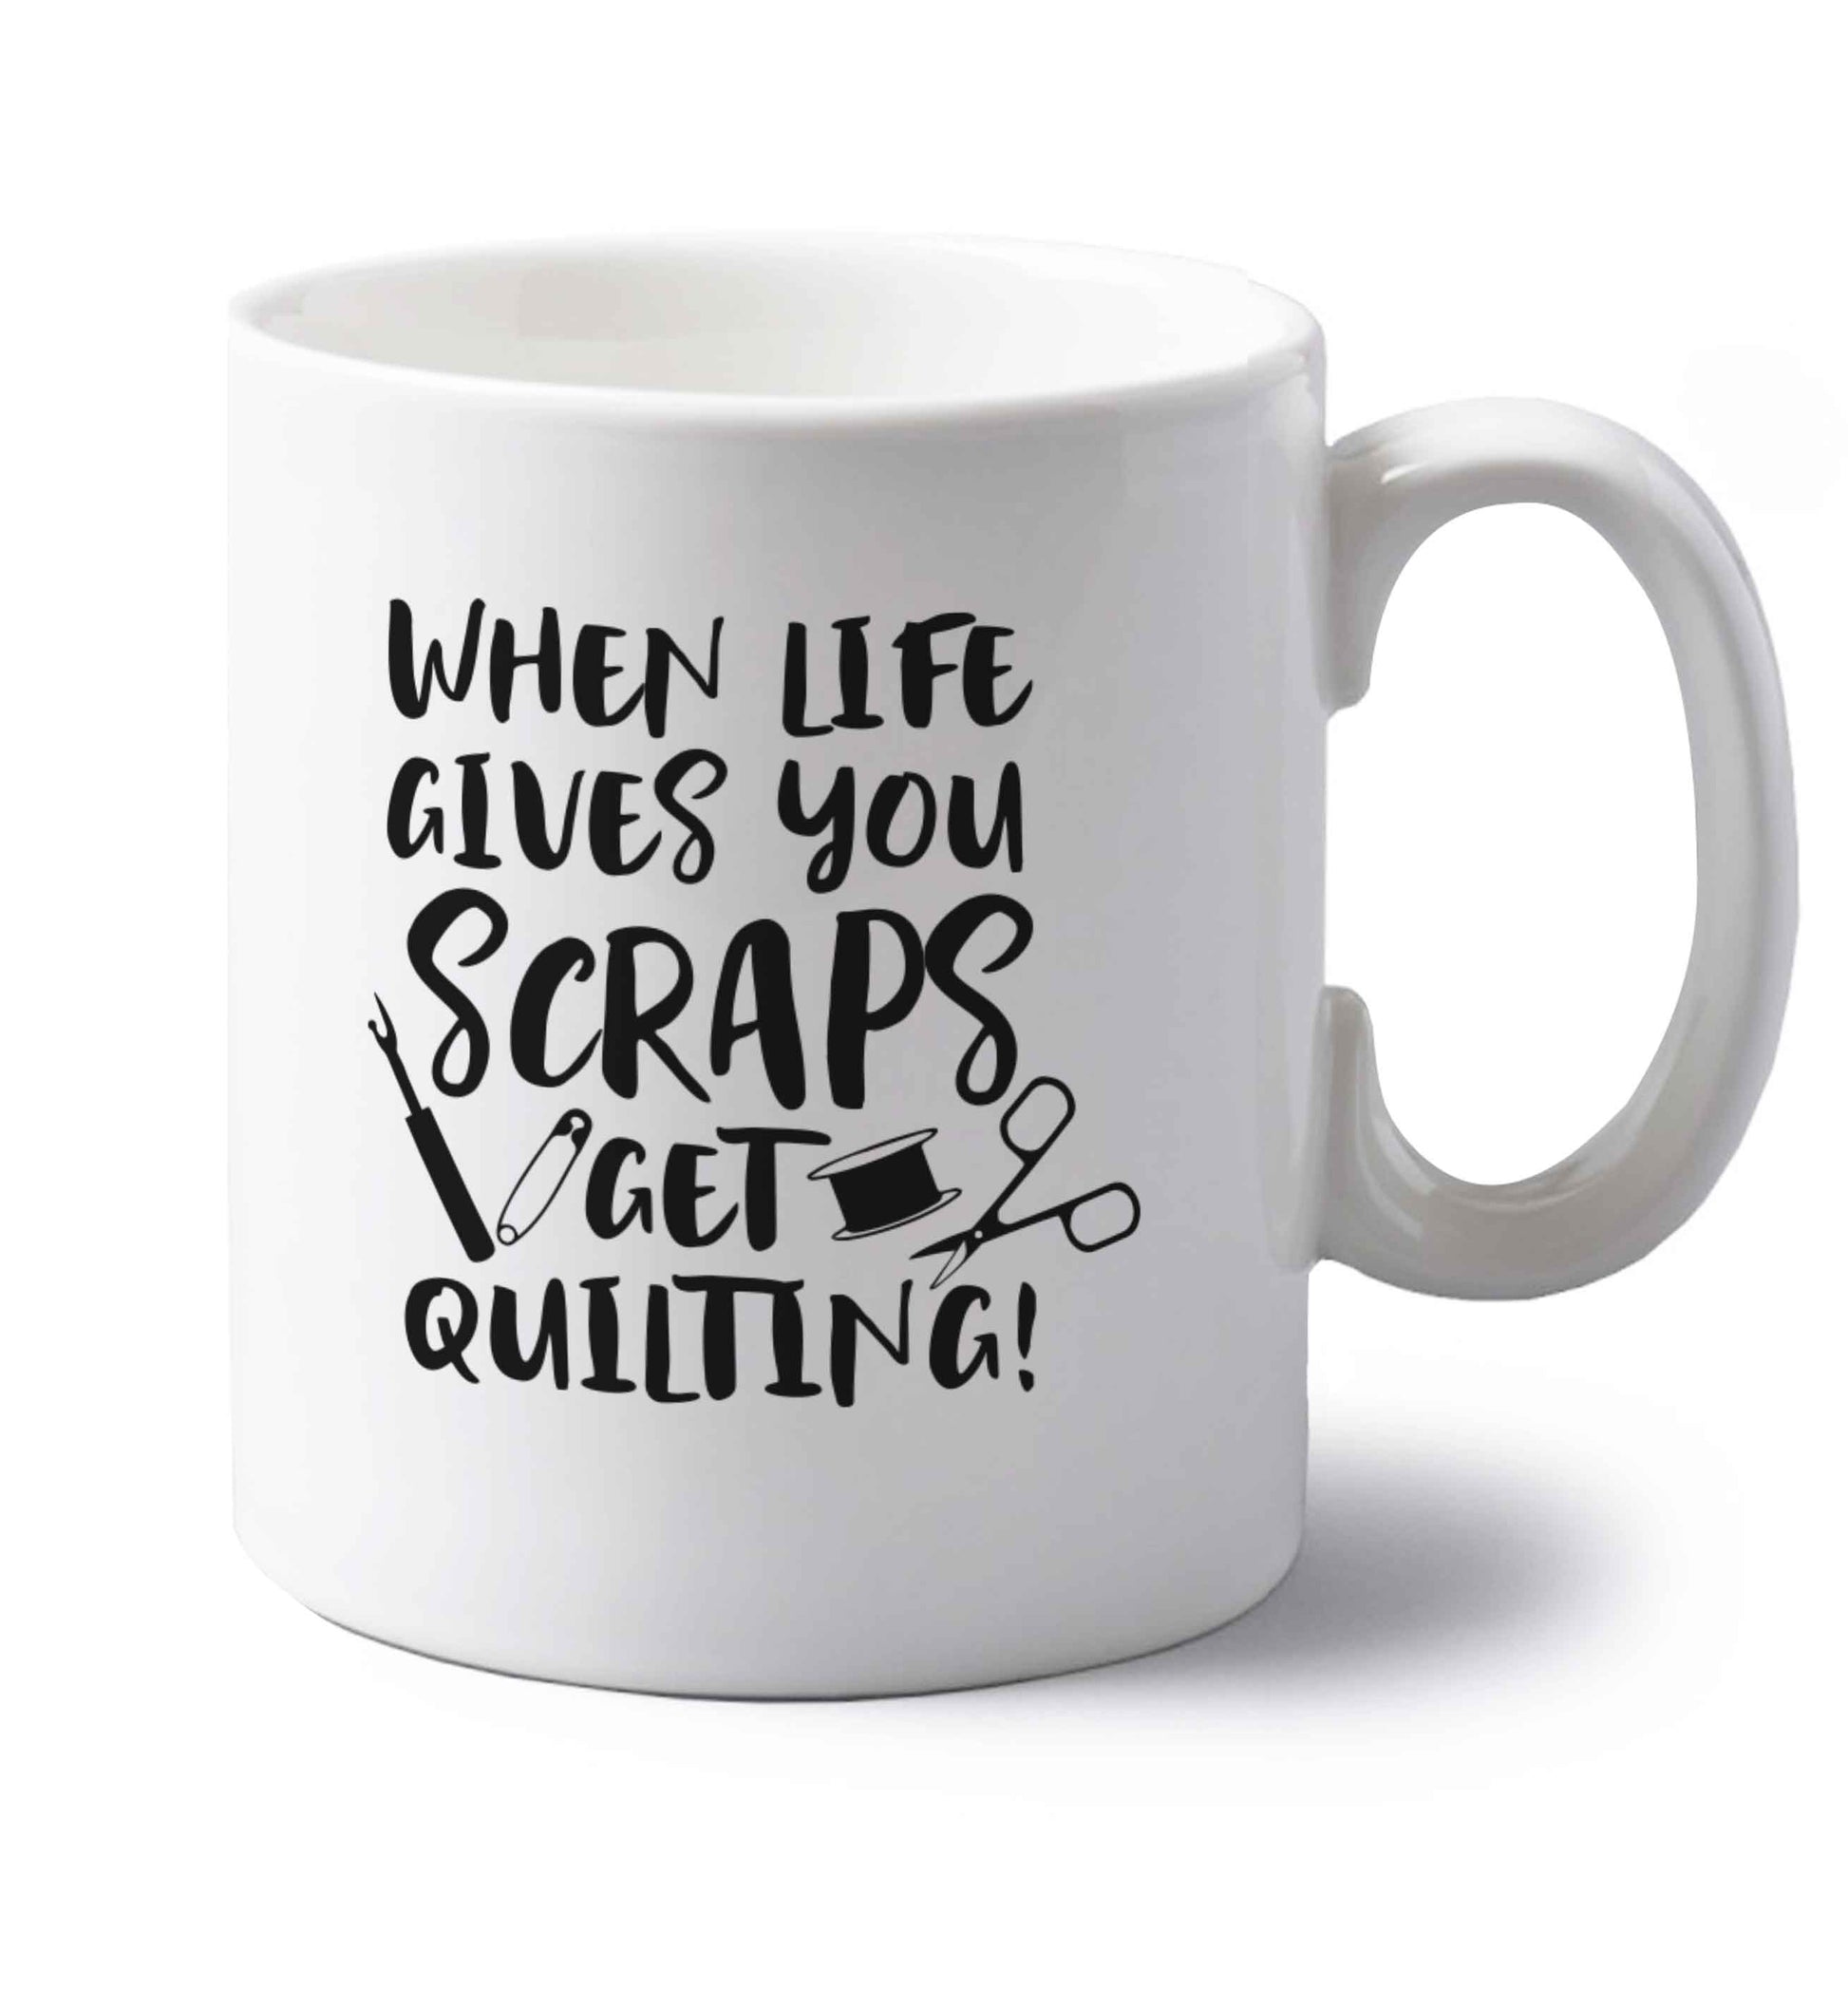 When life gives you scraps get quilting! left handed white ceramic mug 